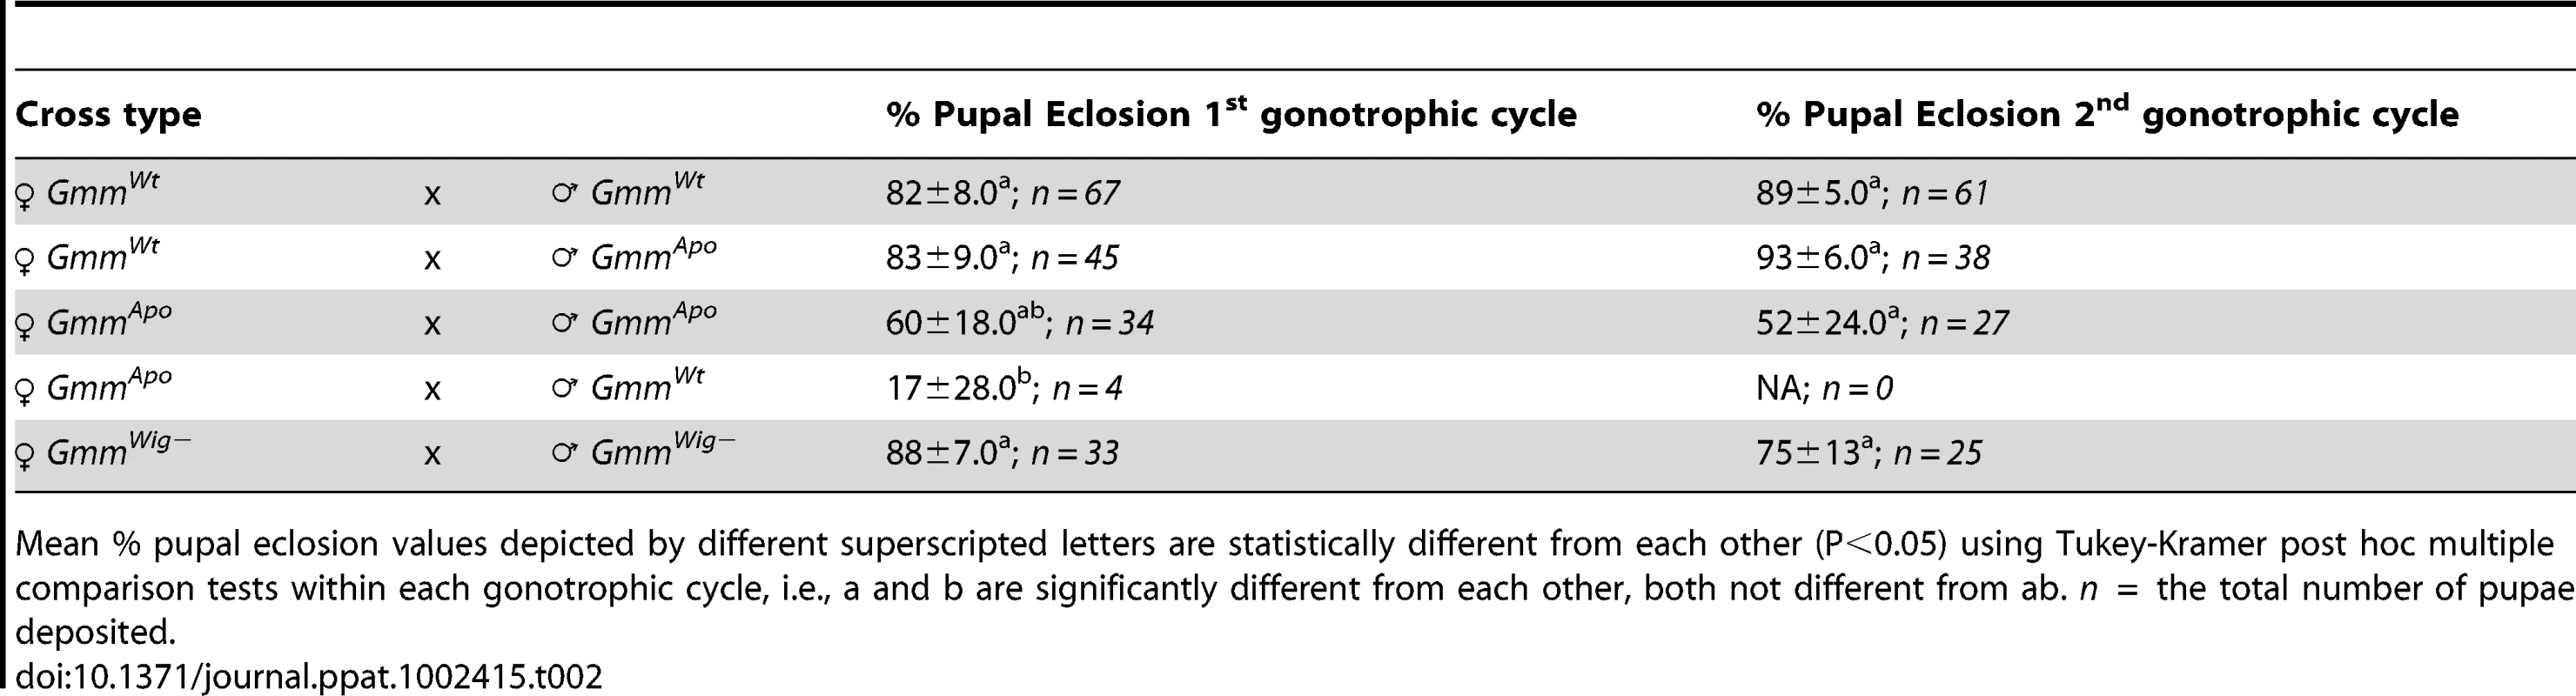 Eclosion rates (%) of deposited pupae.